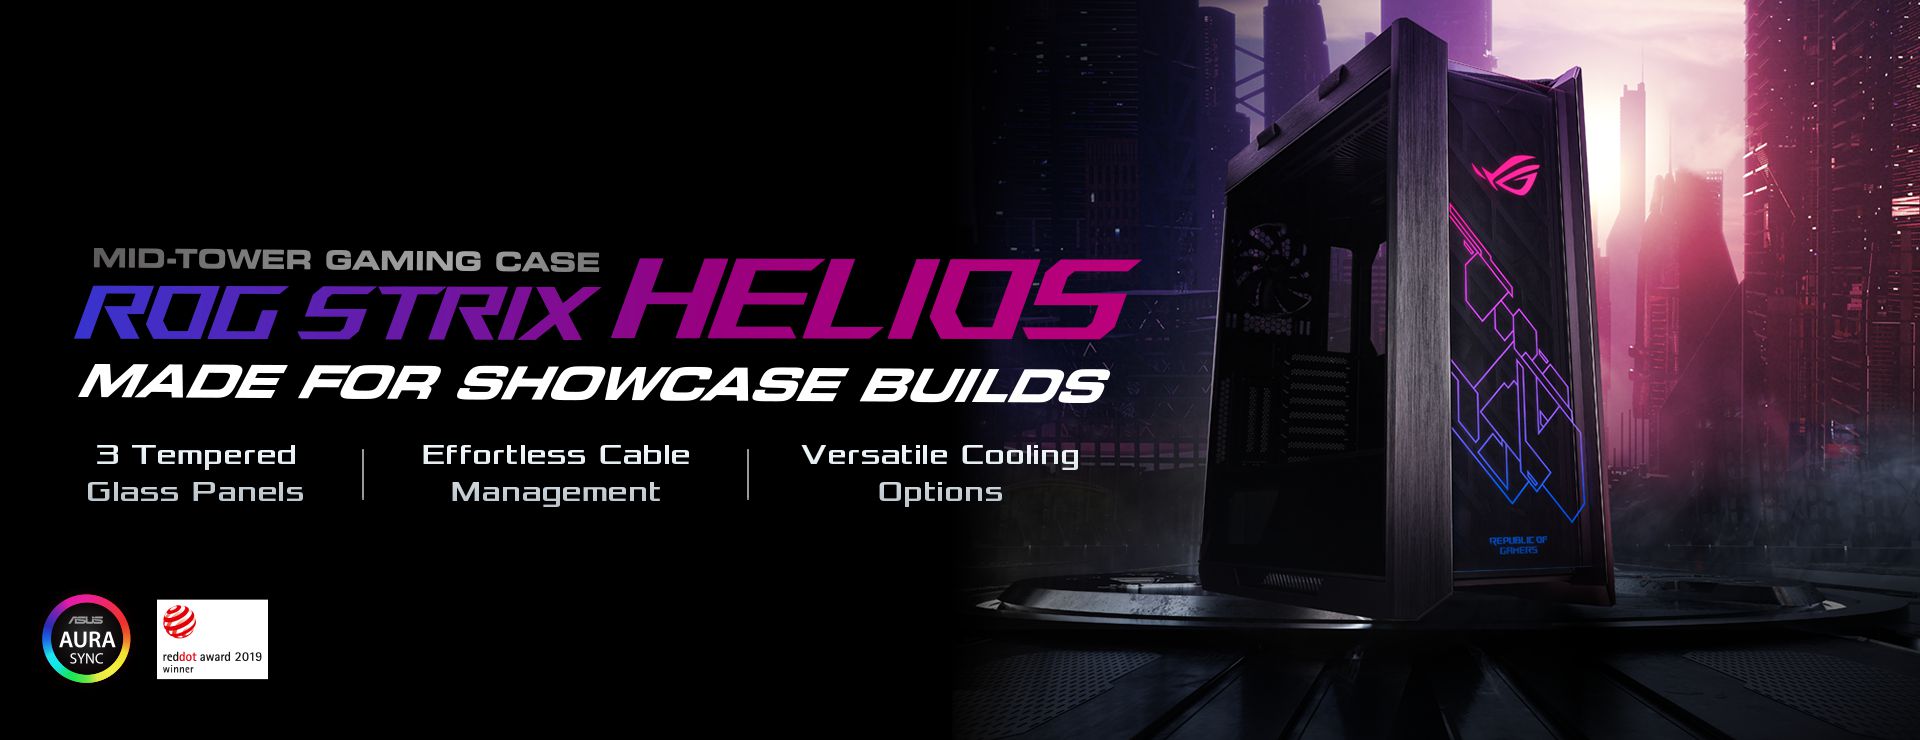 ROG Strix Helios mid-tower gaming case product photo with cyberpunk city background